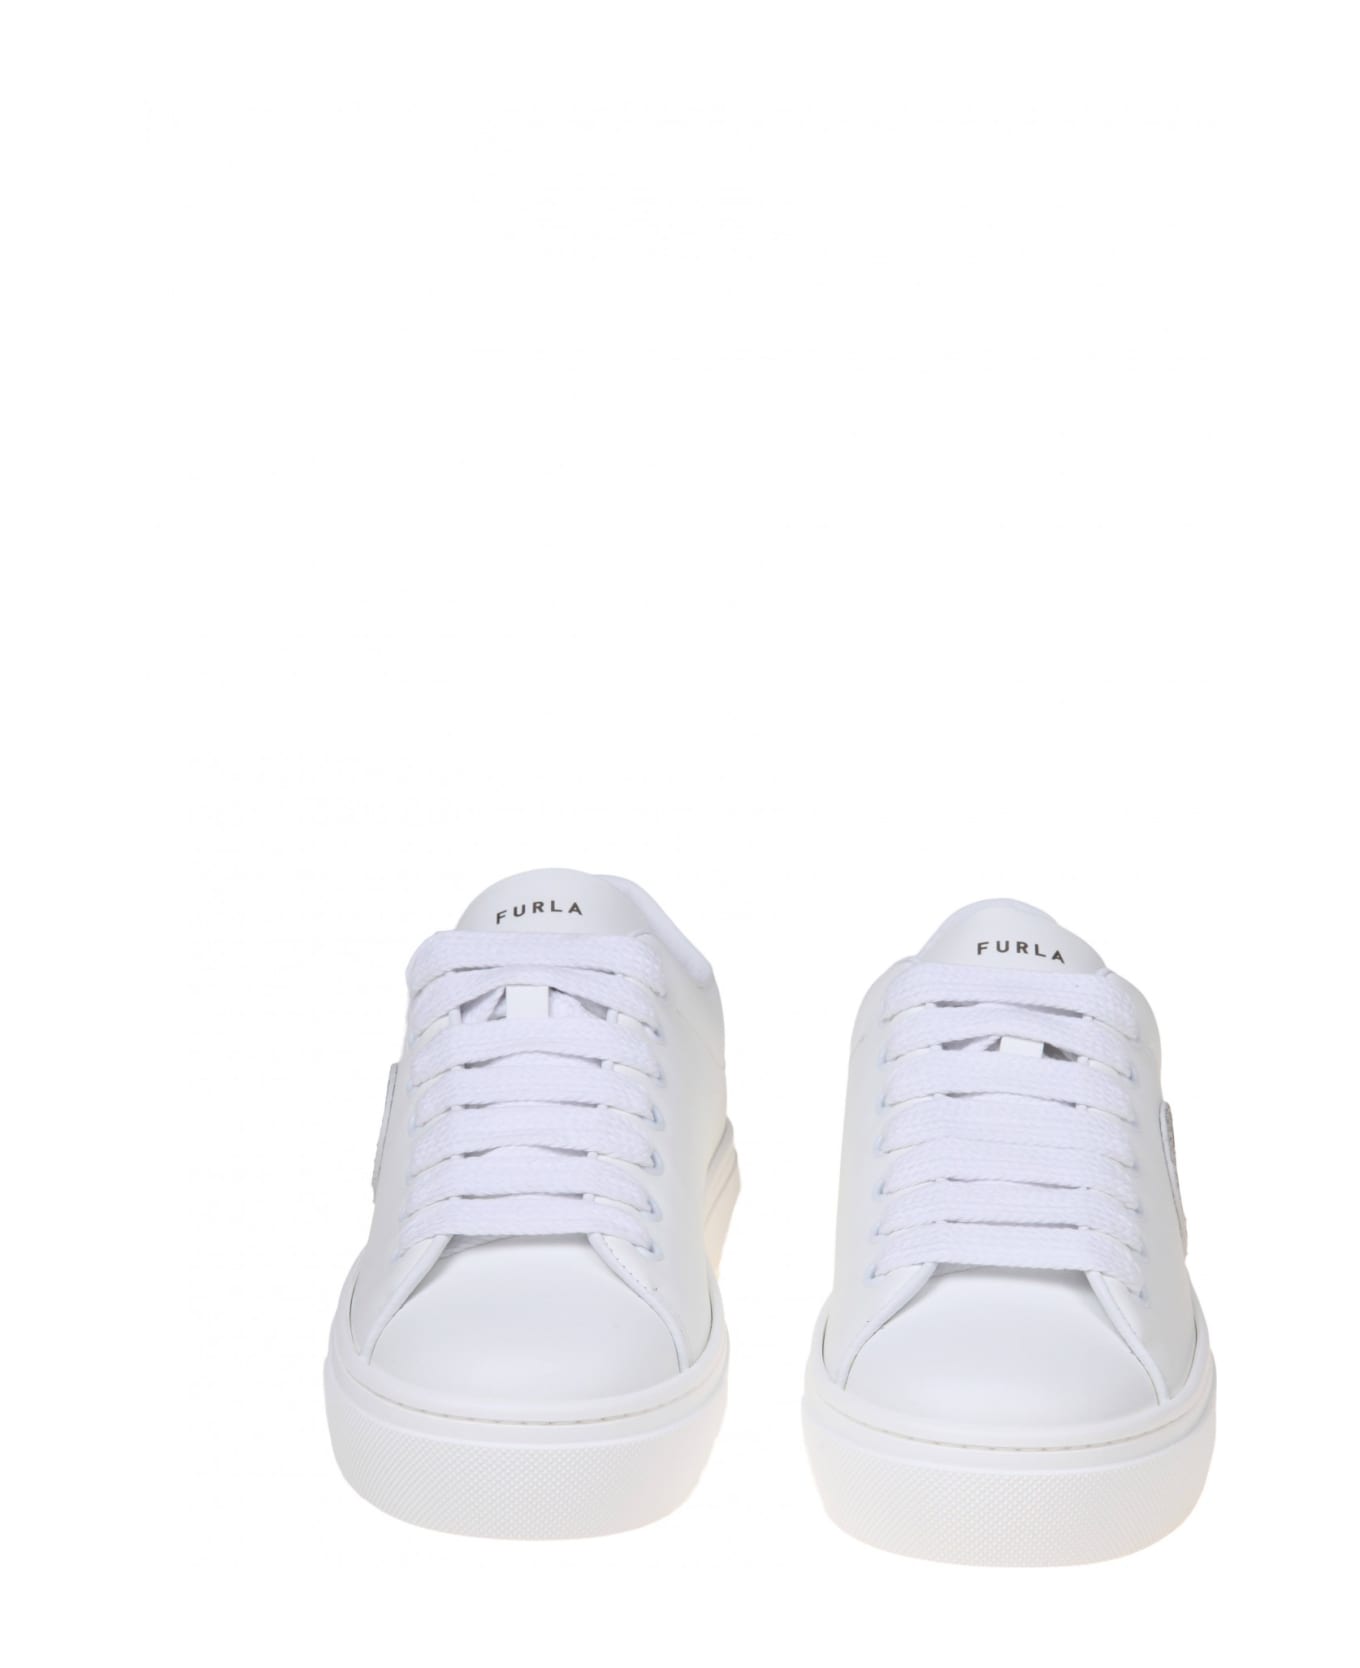 Furla Joy Lace Up Sneakers In White Leather - TALC/SILVER